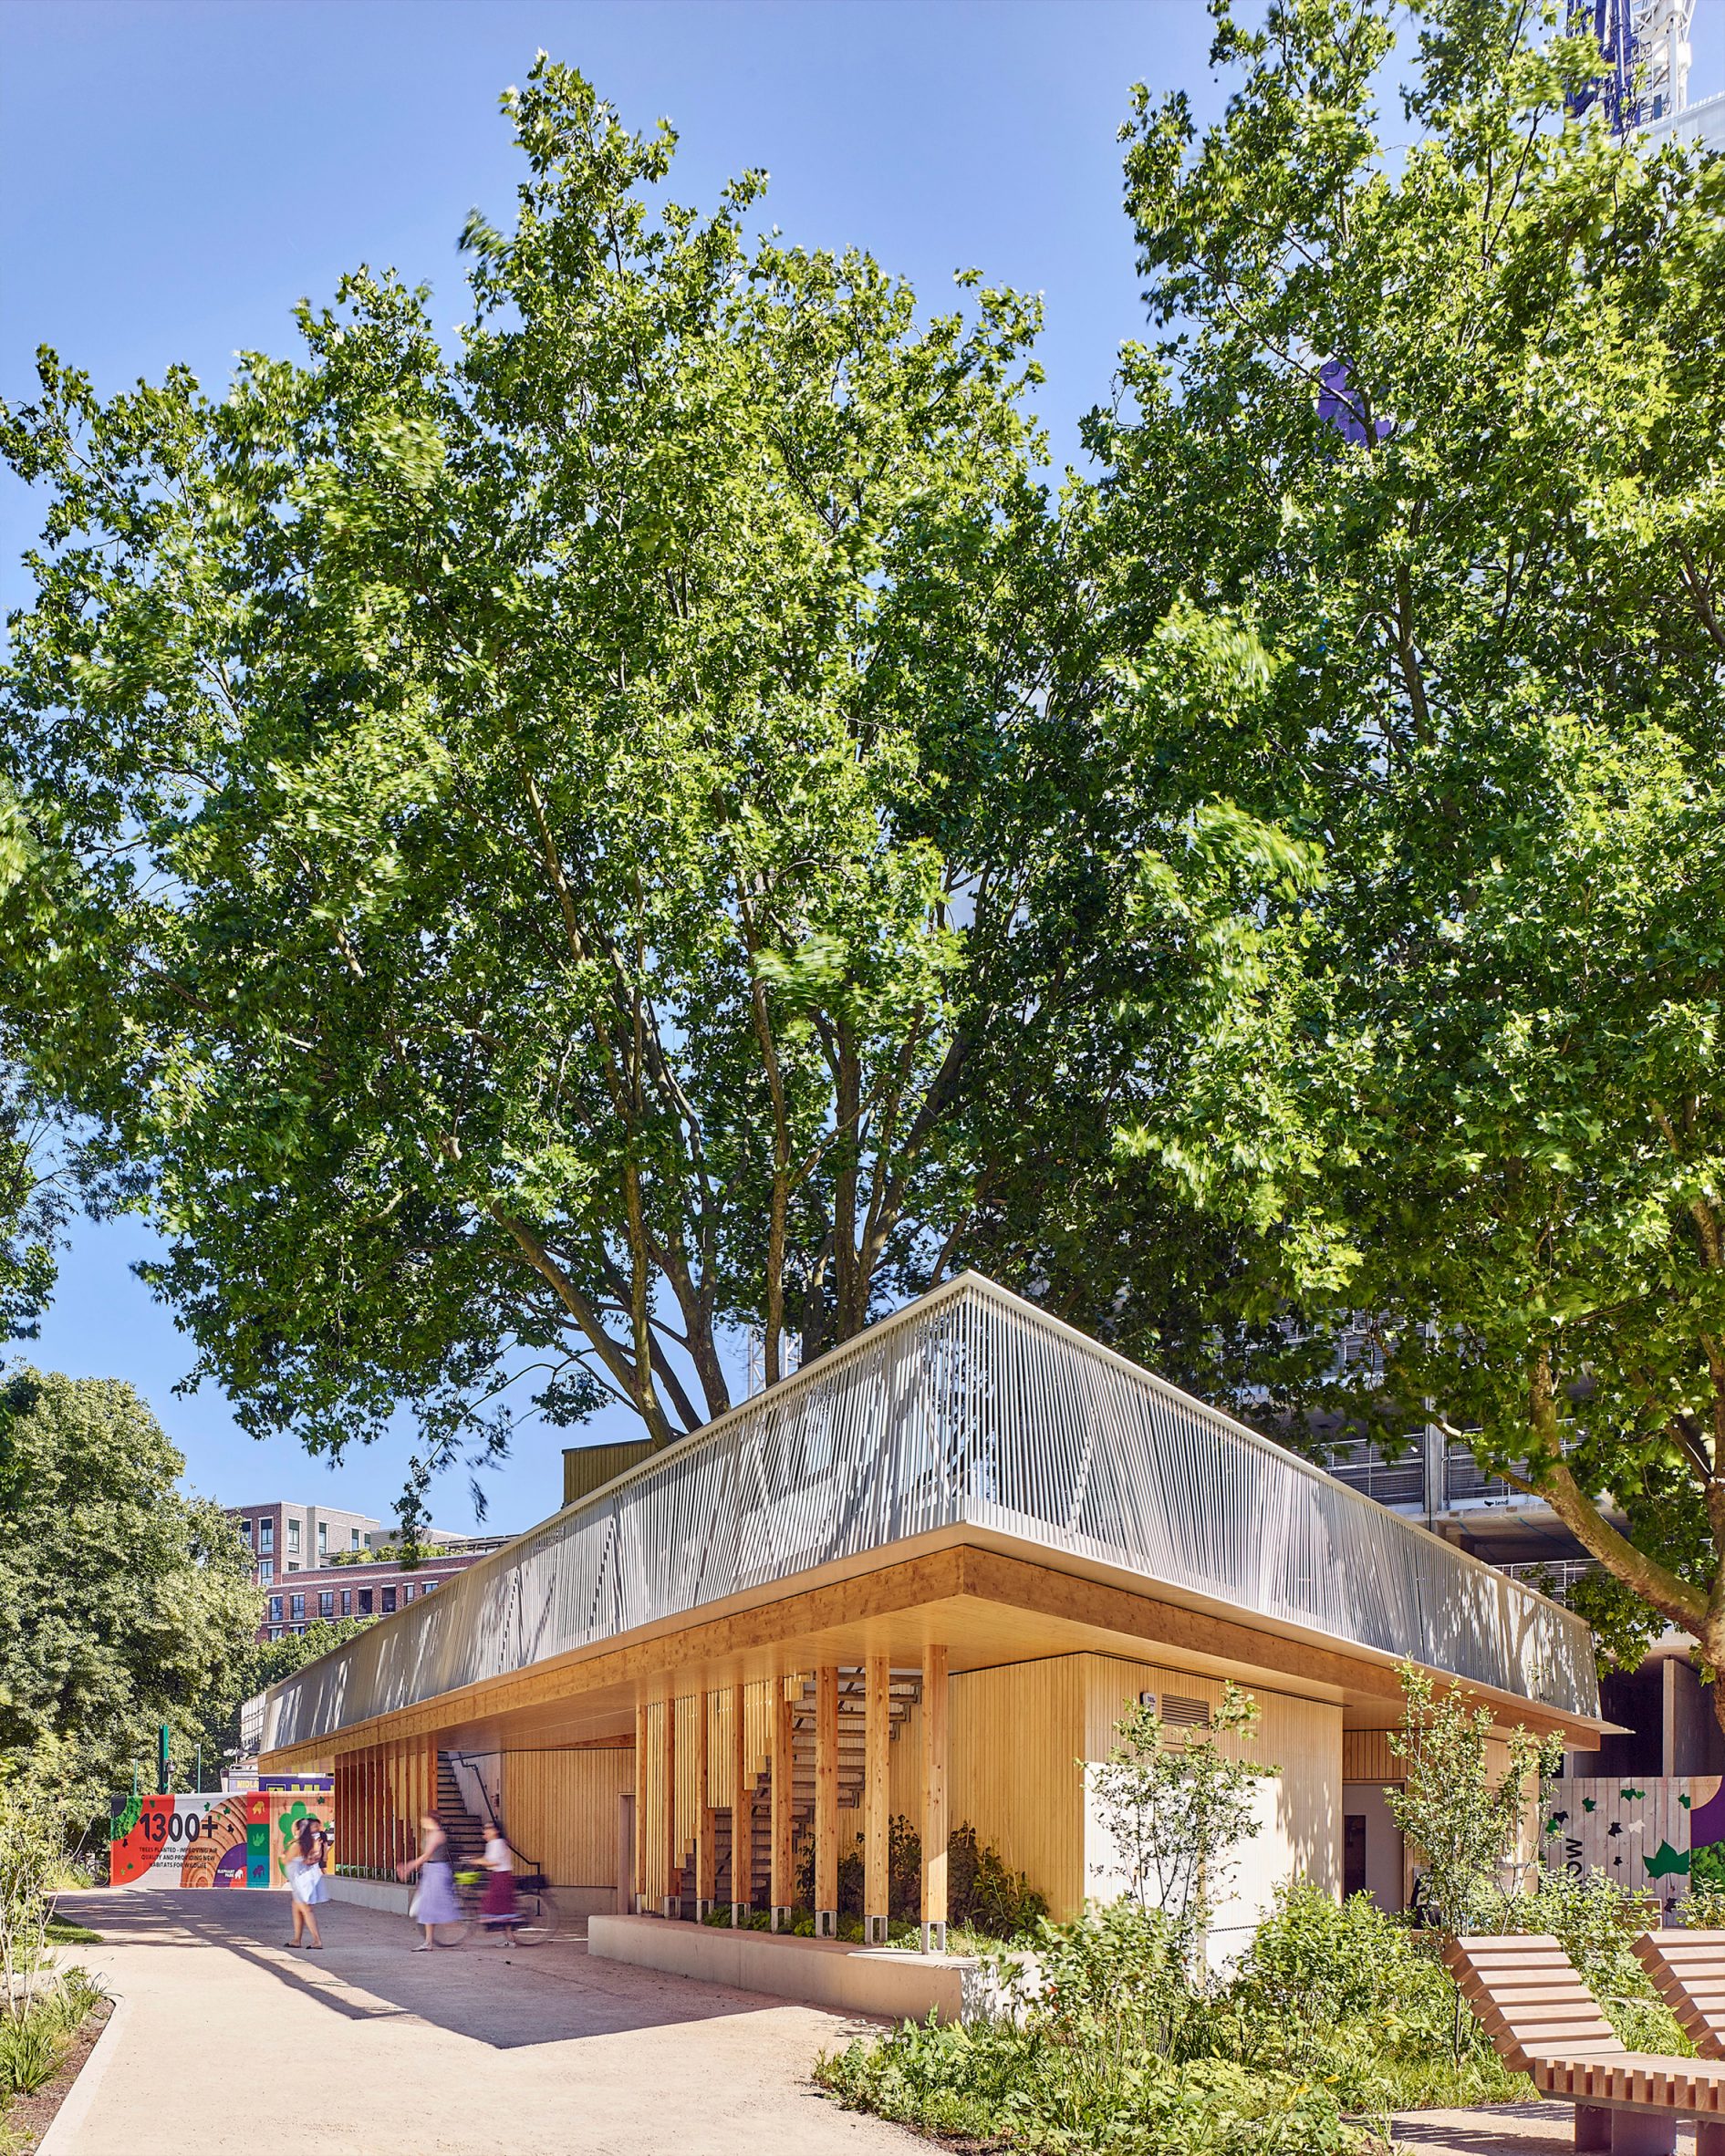 The Tree House pavilion by Bell Phillips